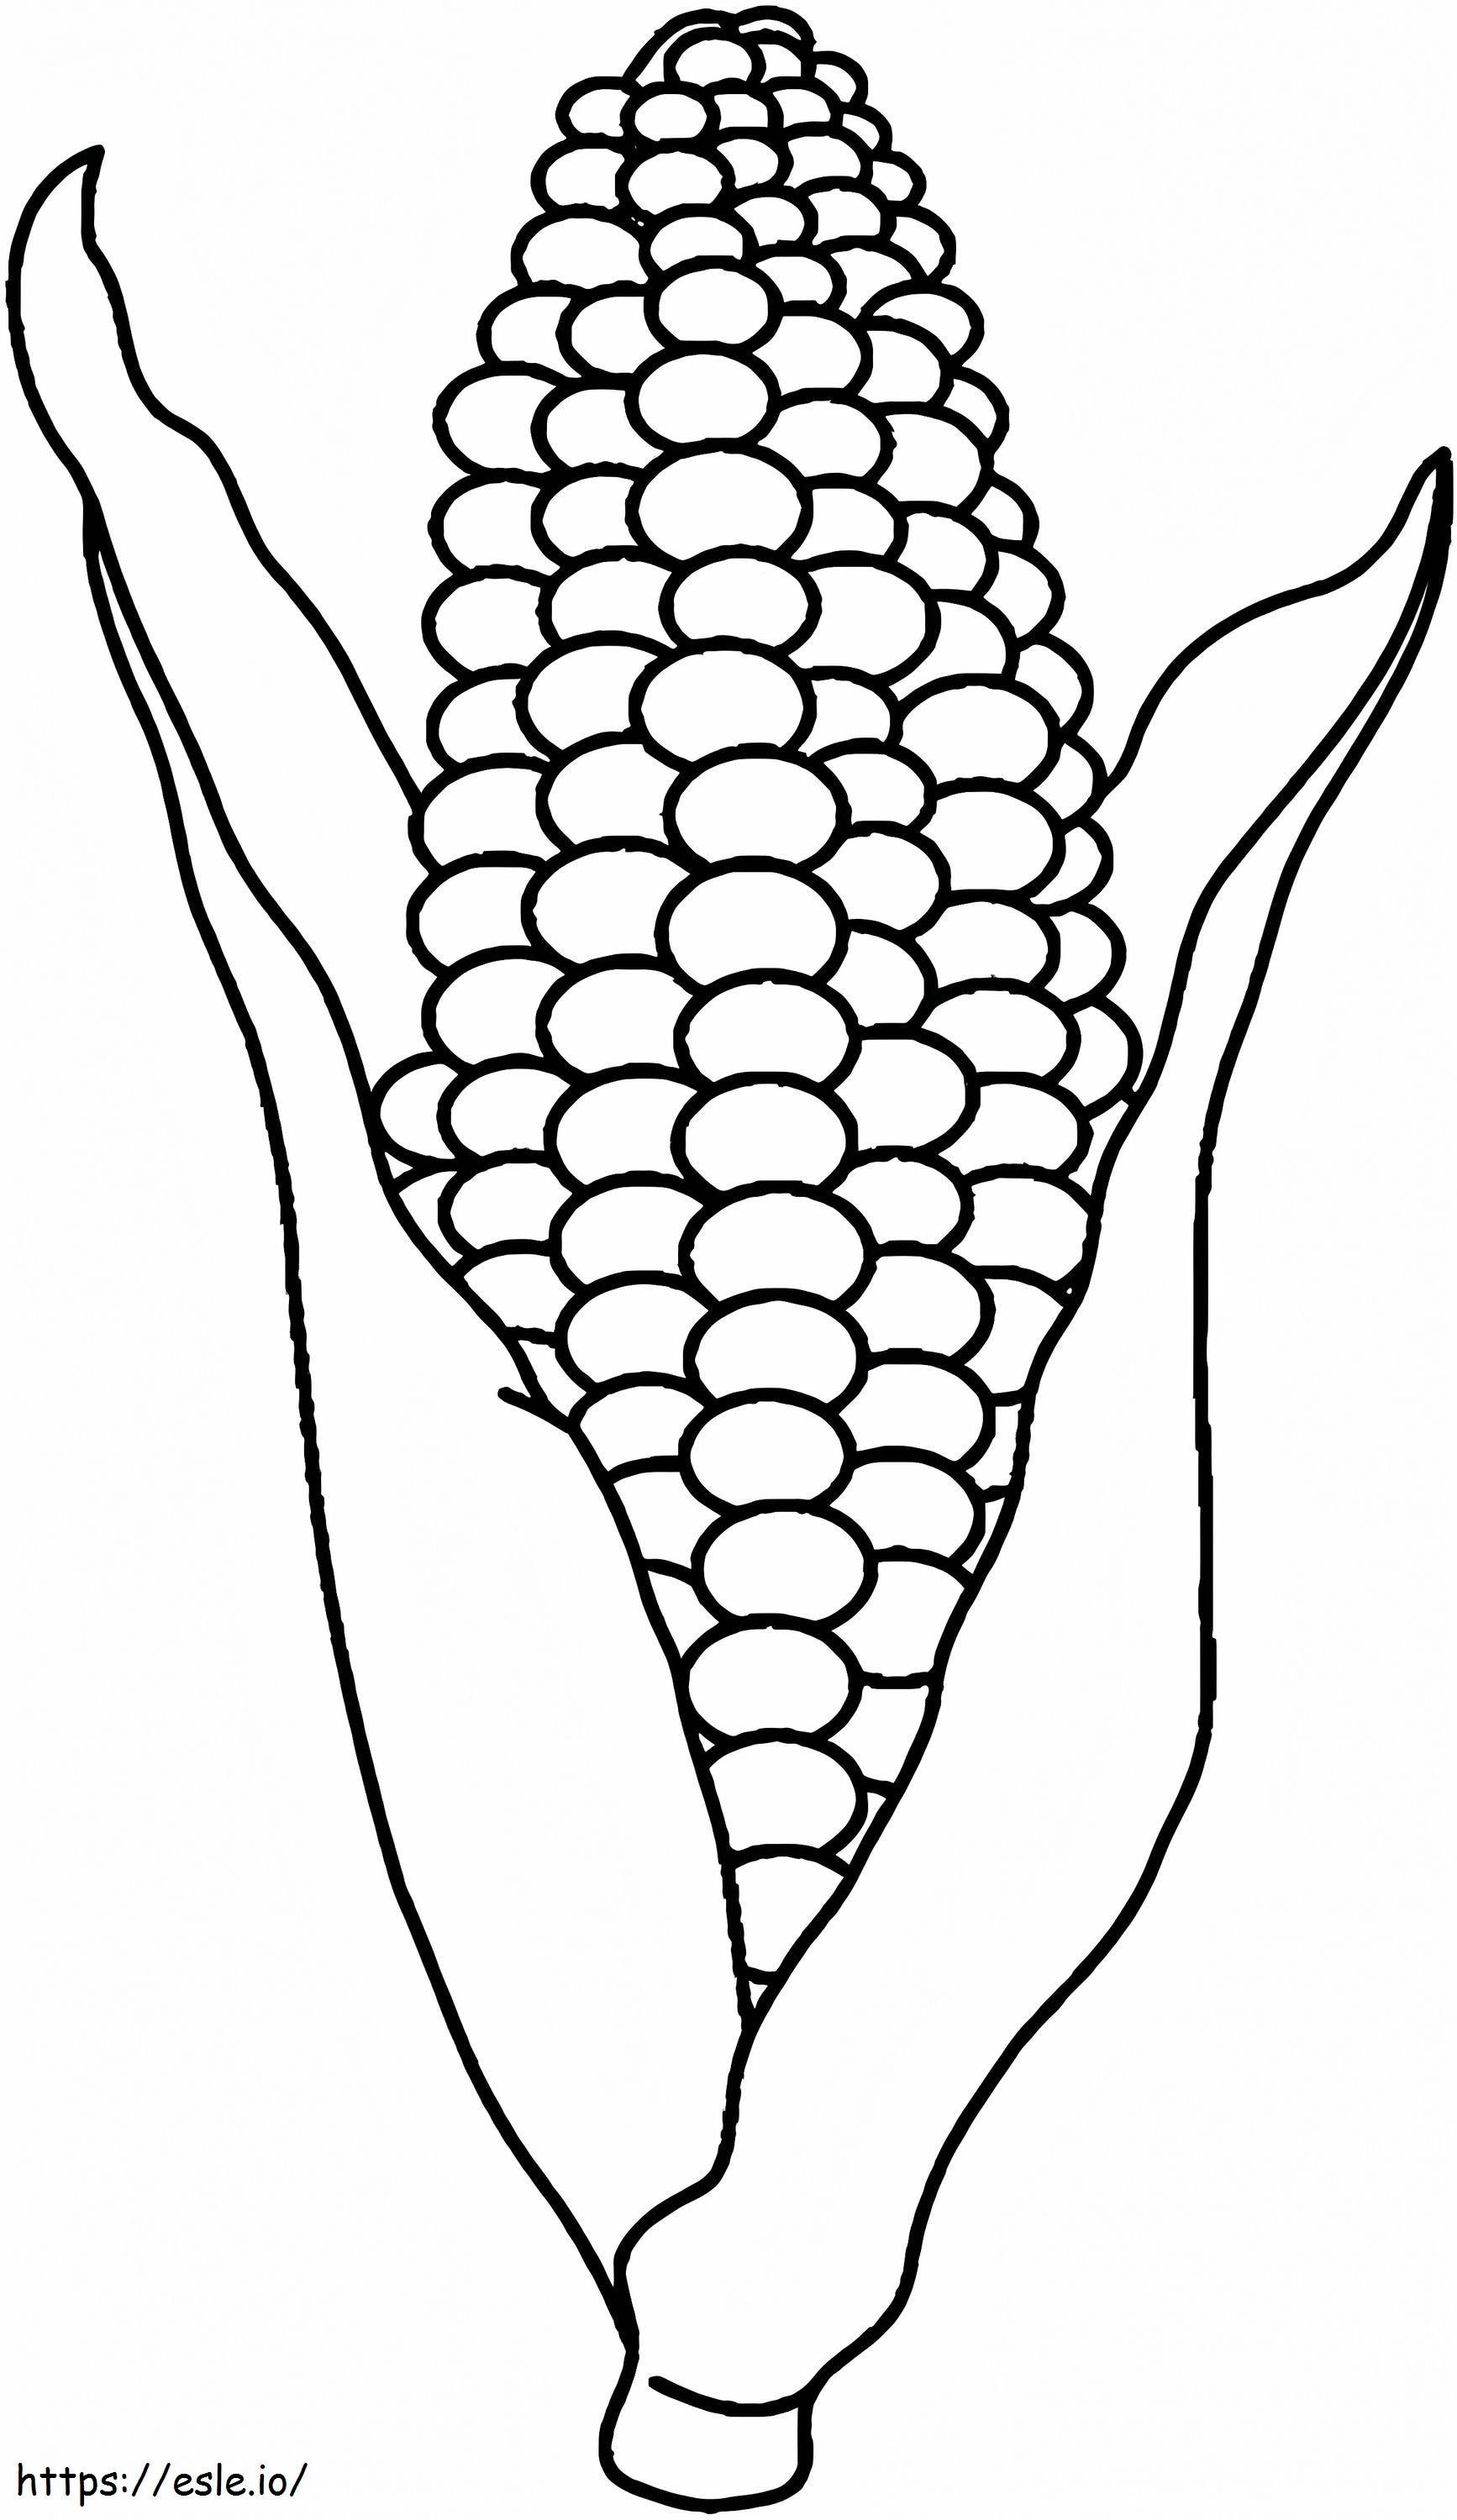 Basic Corn coloring page